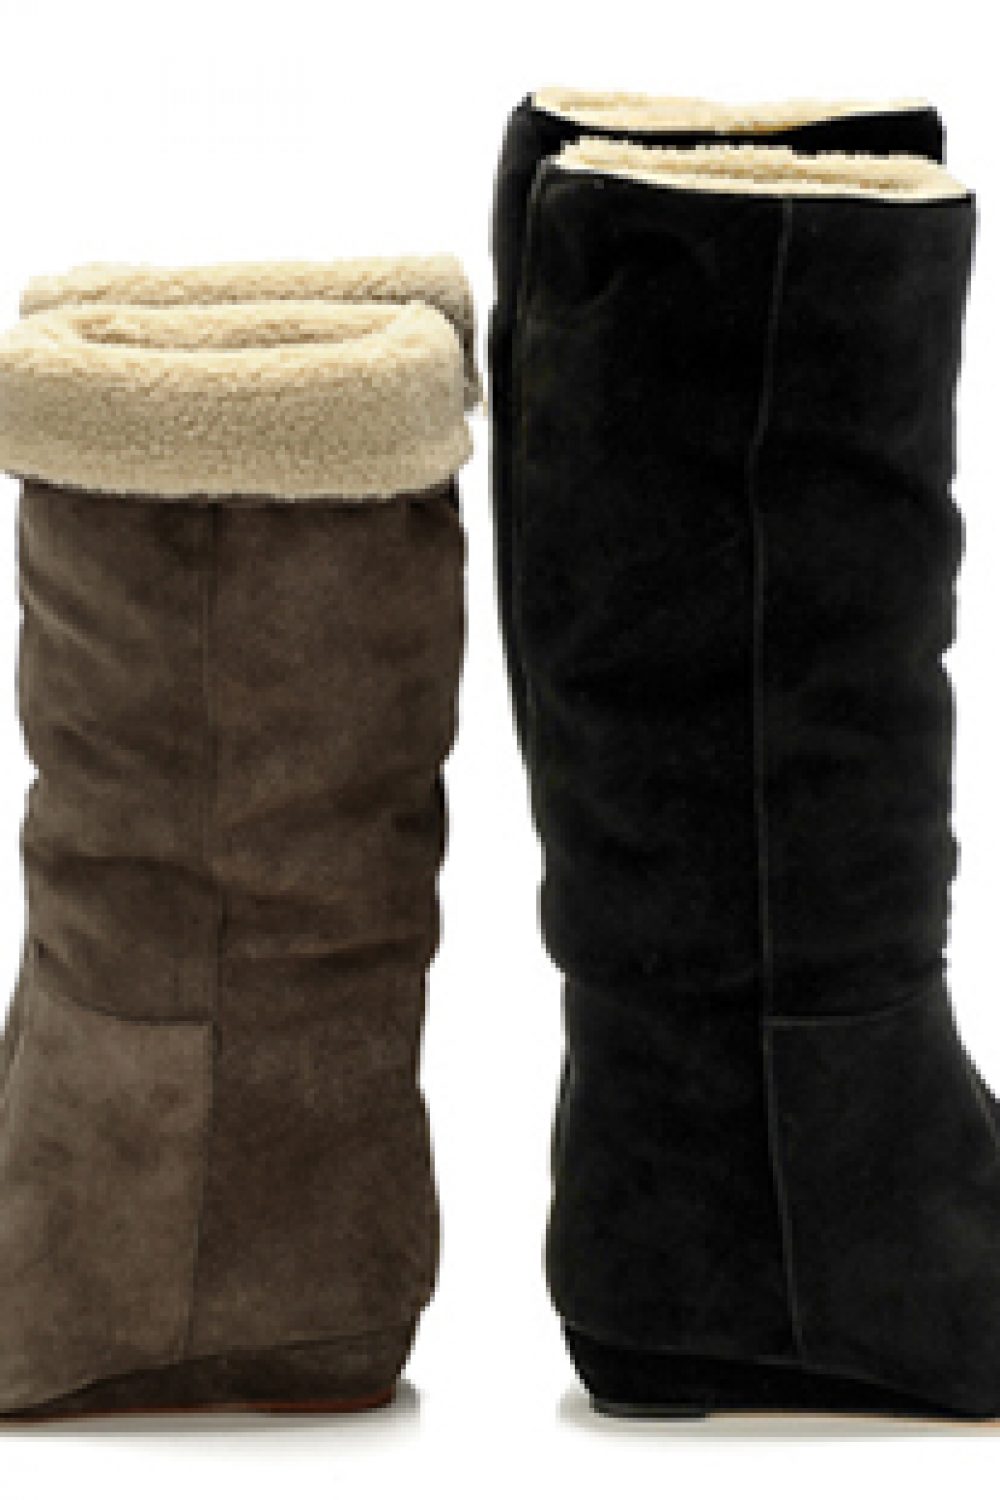 Shearling Boots from Loeffler Randall are on My Wish List